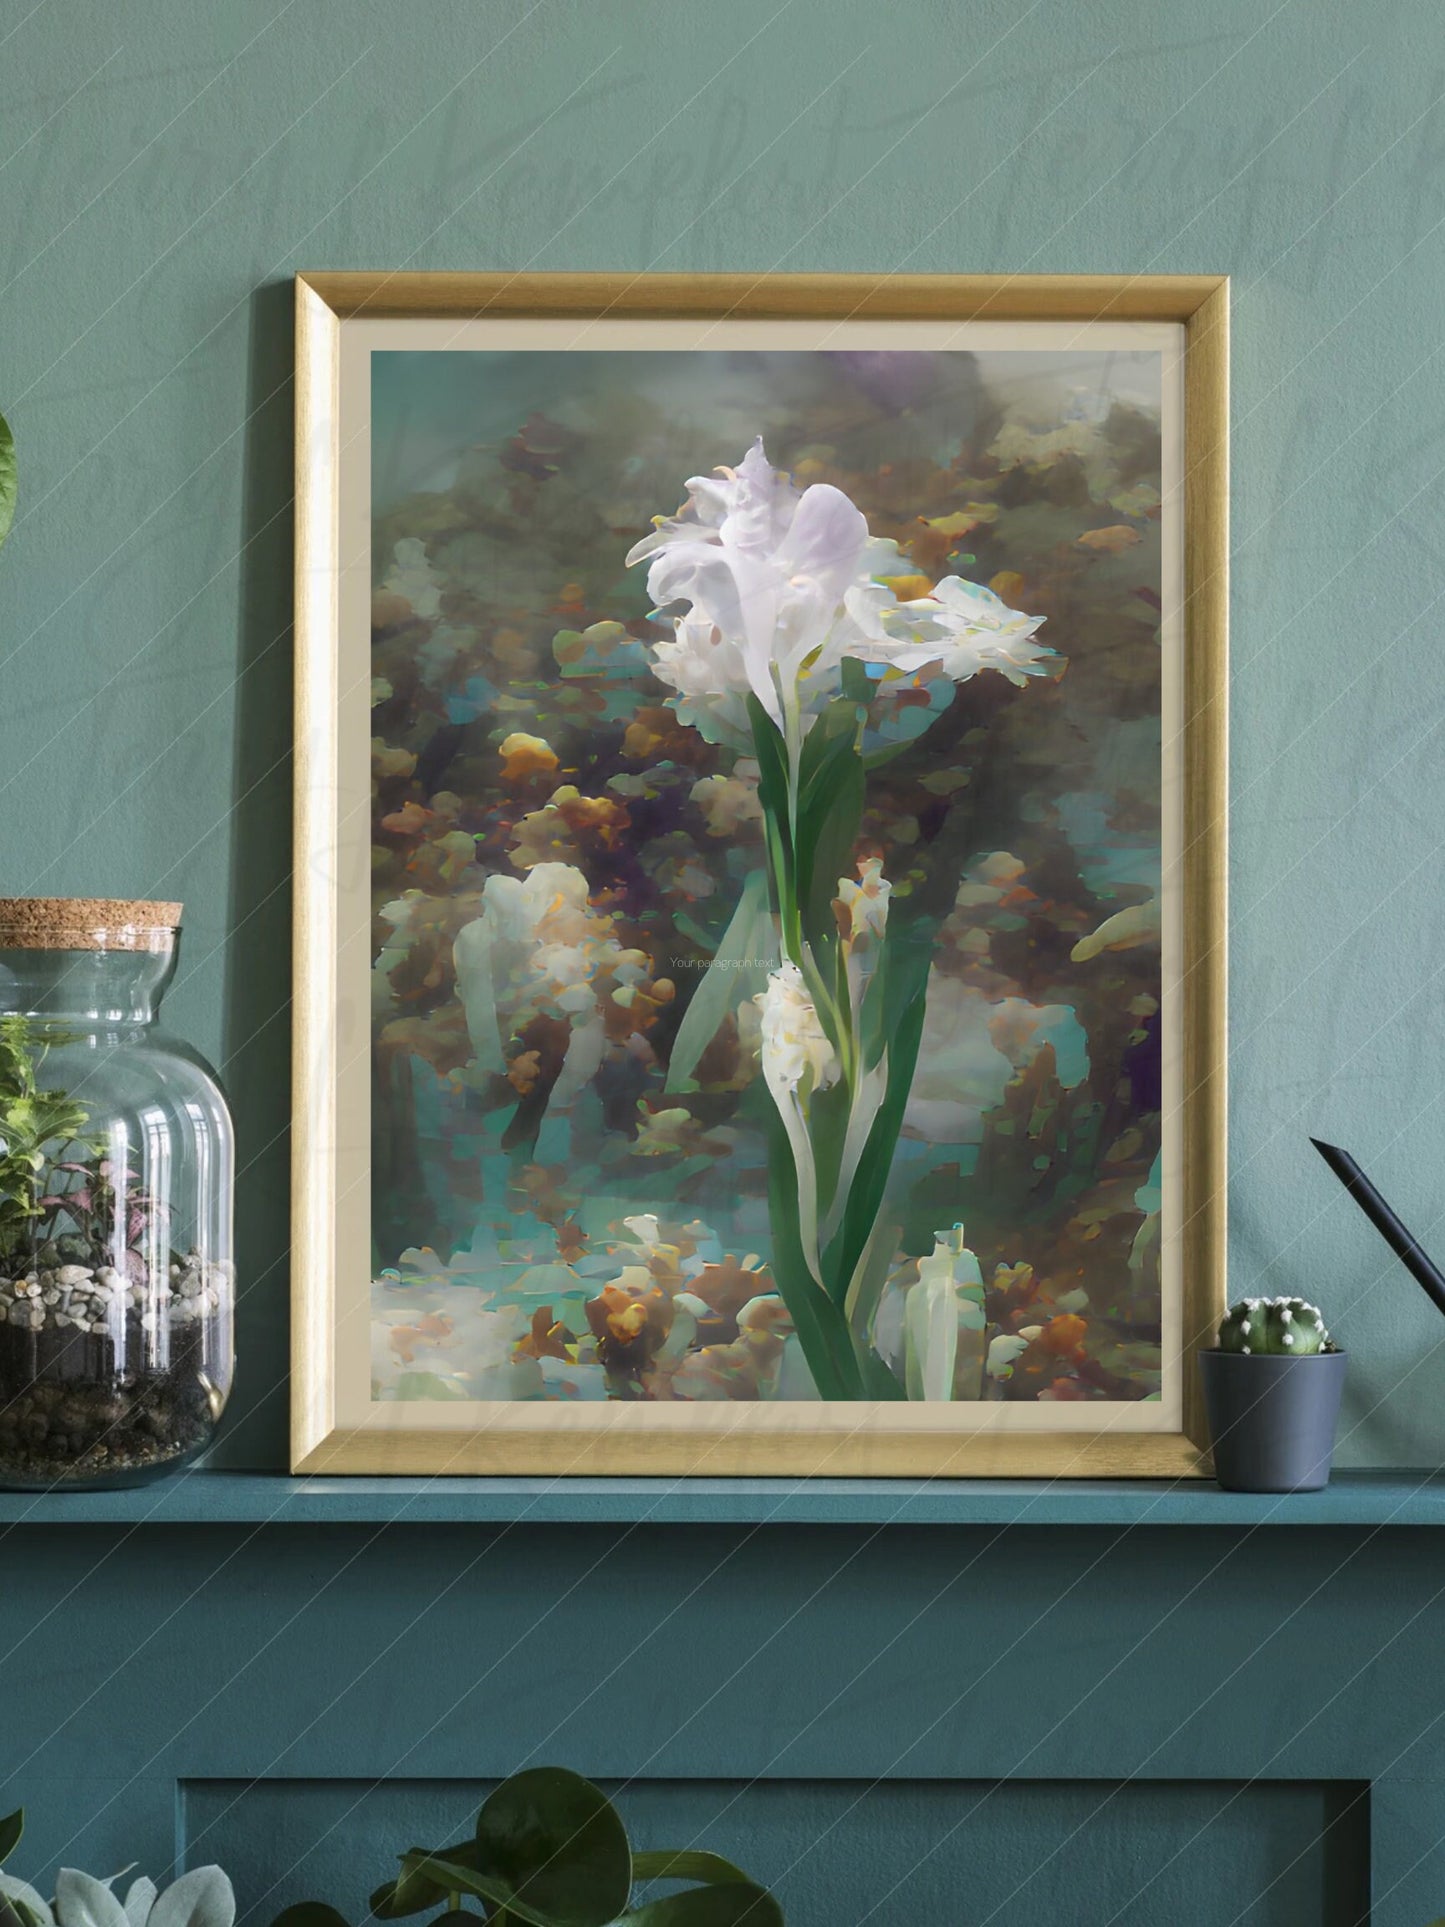 White Takes Flight - Snow White Iris painting - Fine Art print ready to frame, Gallery Wrapped Canvas -  multiple size options.